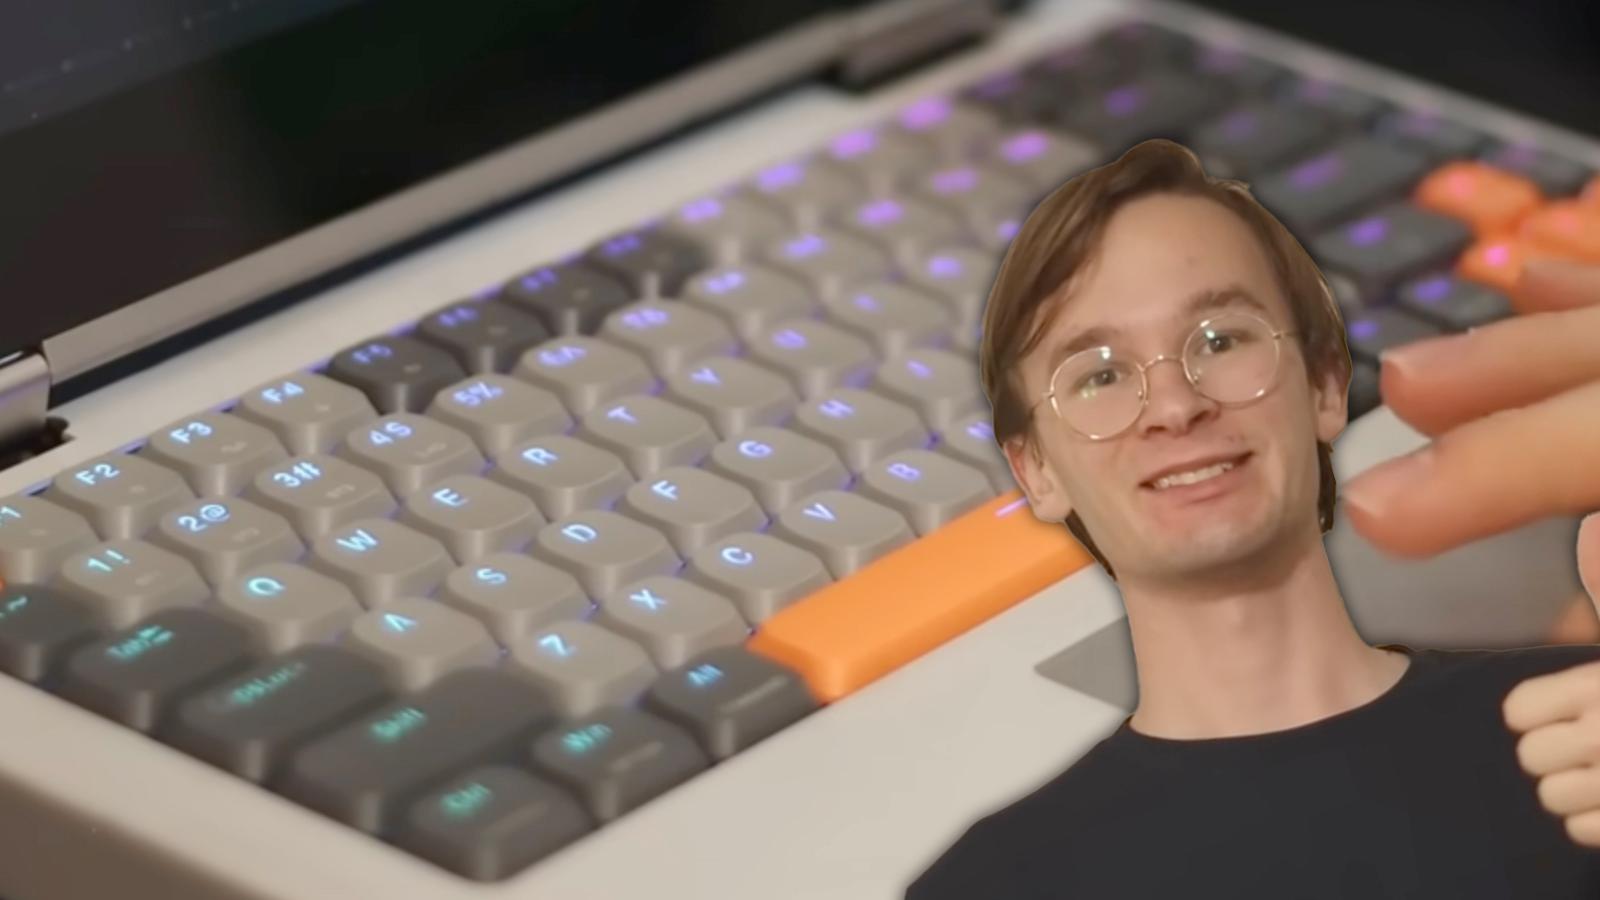 marcin plaza in front of his new mechanical keyboard laptop